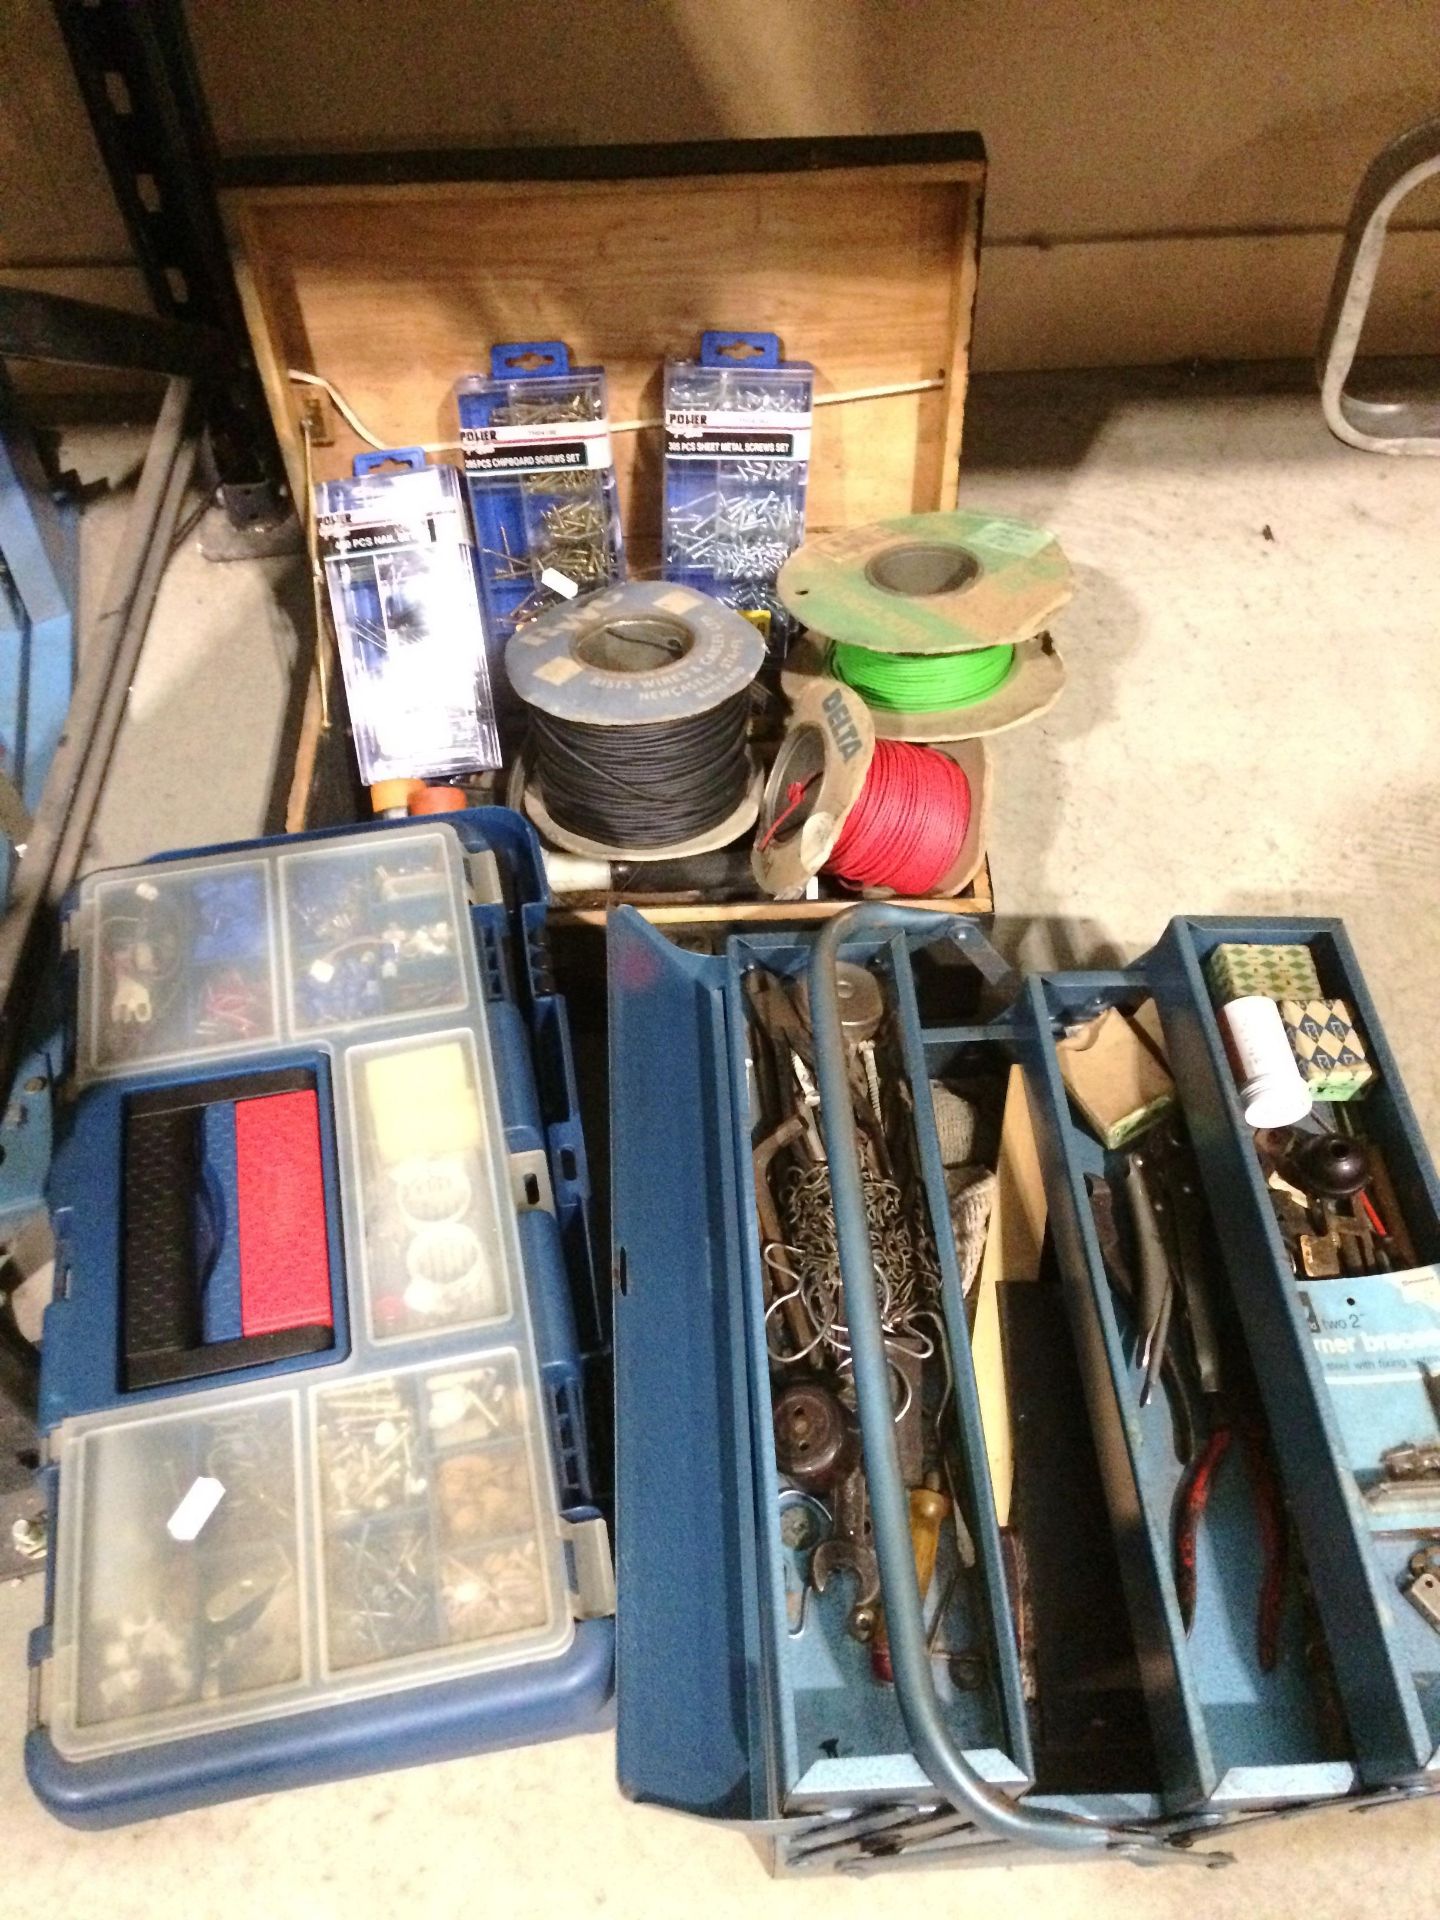 3 x tool boxes and contents - part rolls wire, screws, nails, tools, including hammers,